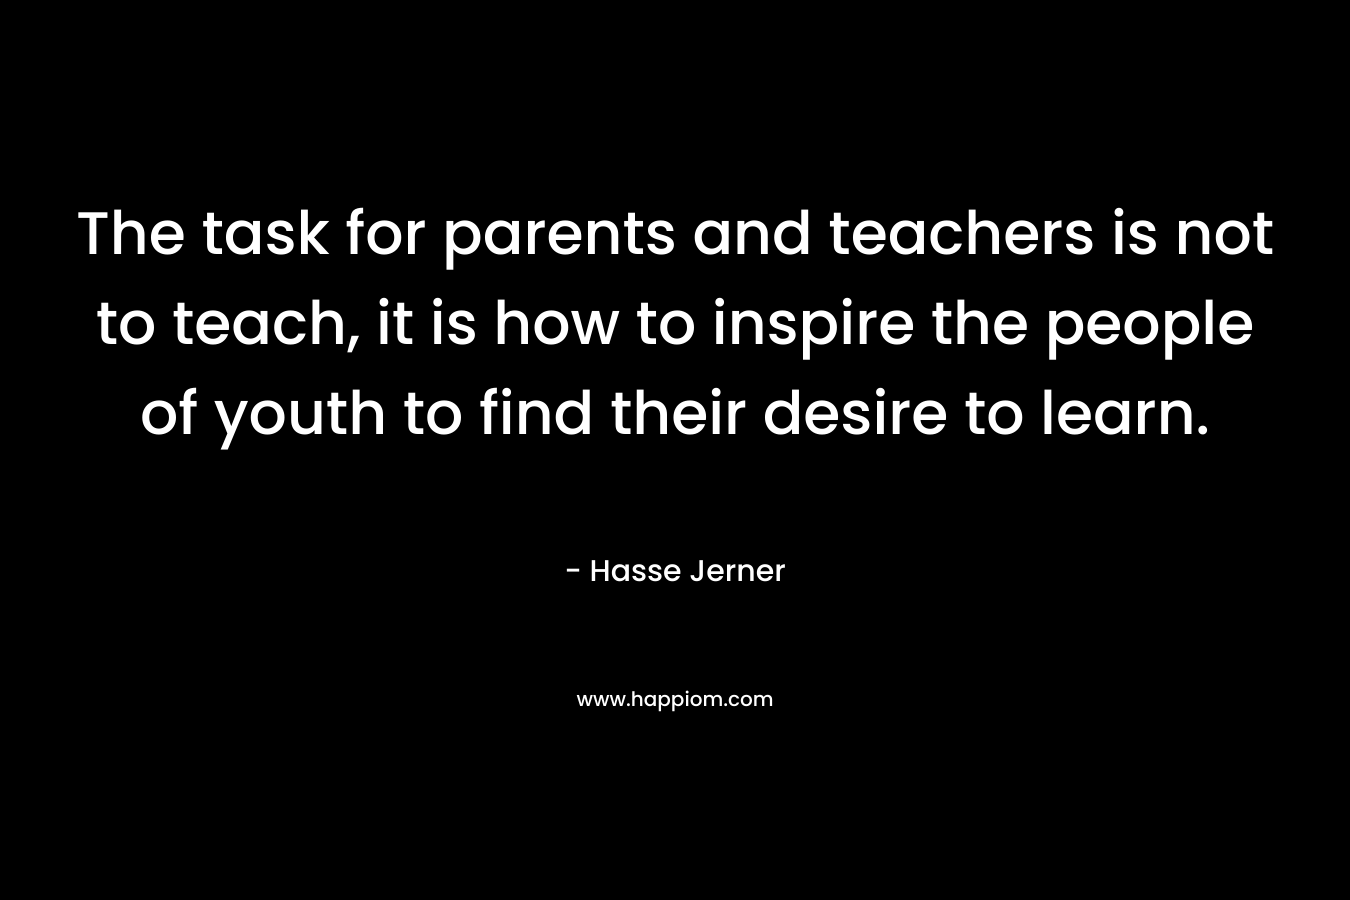 The task for parents and teachers is not to teach, it is how to inspire the people of youth to find their desire to learn. – Hasse Jerner